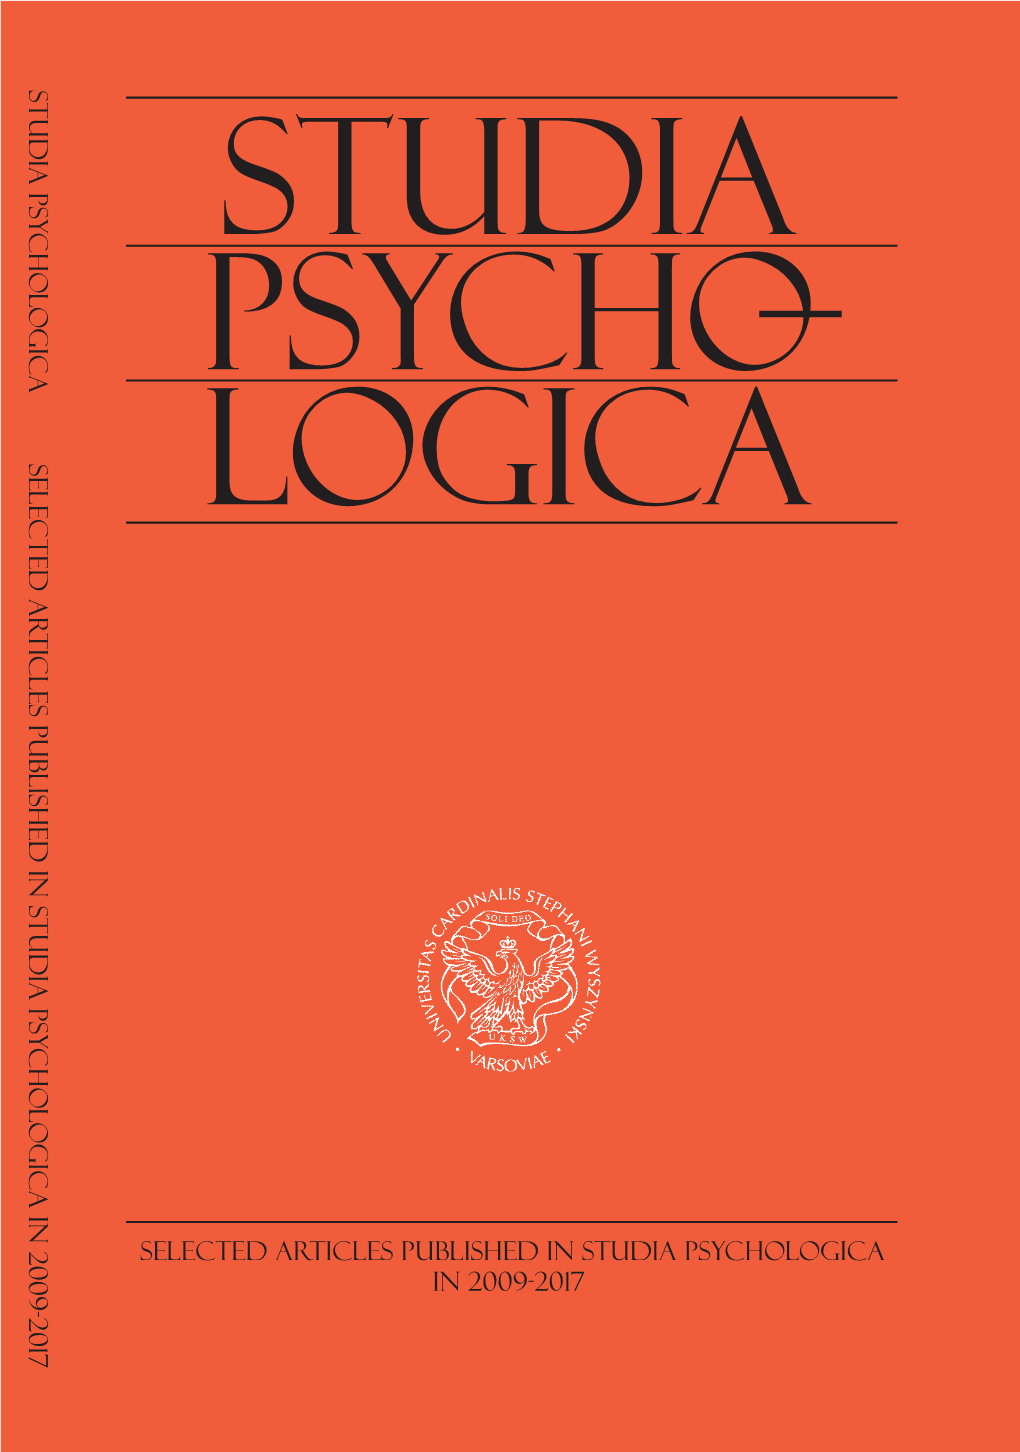 Selected Articles Published in Studia Psychologica in 2009-2017 LOGICA